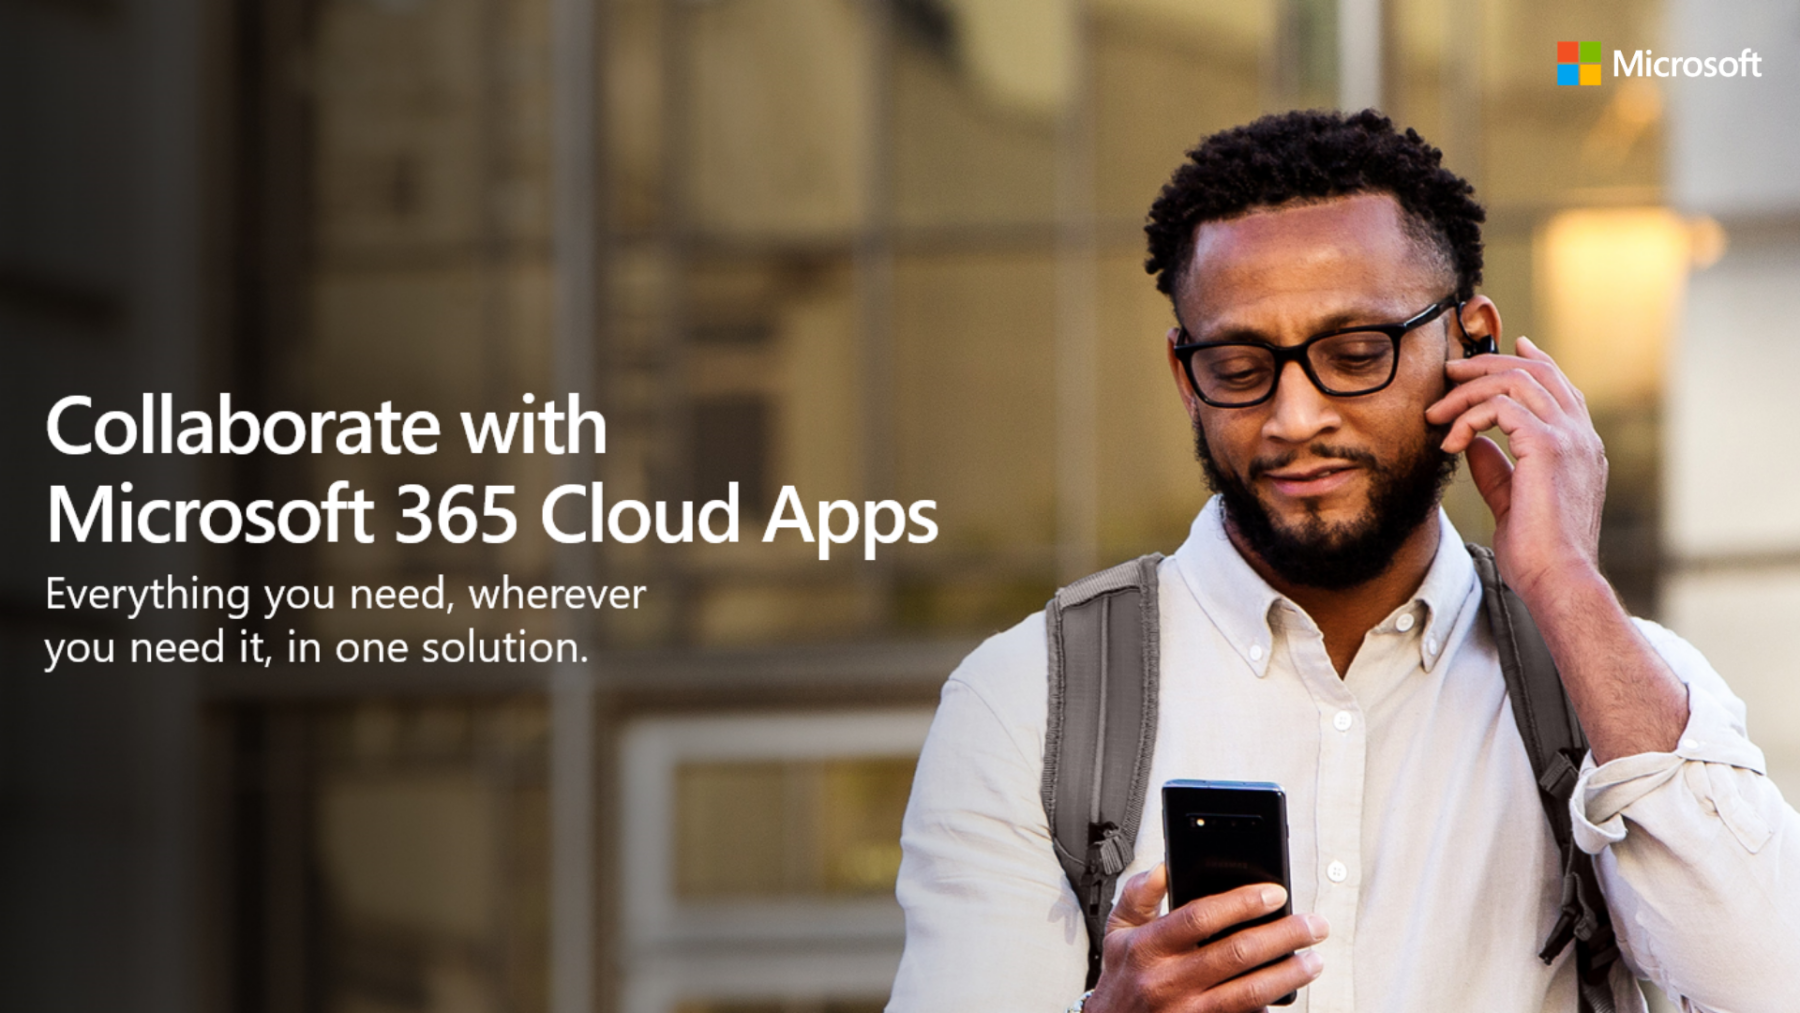 Collaborate with Microsoft 365 Cloud Apps